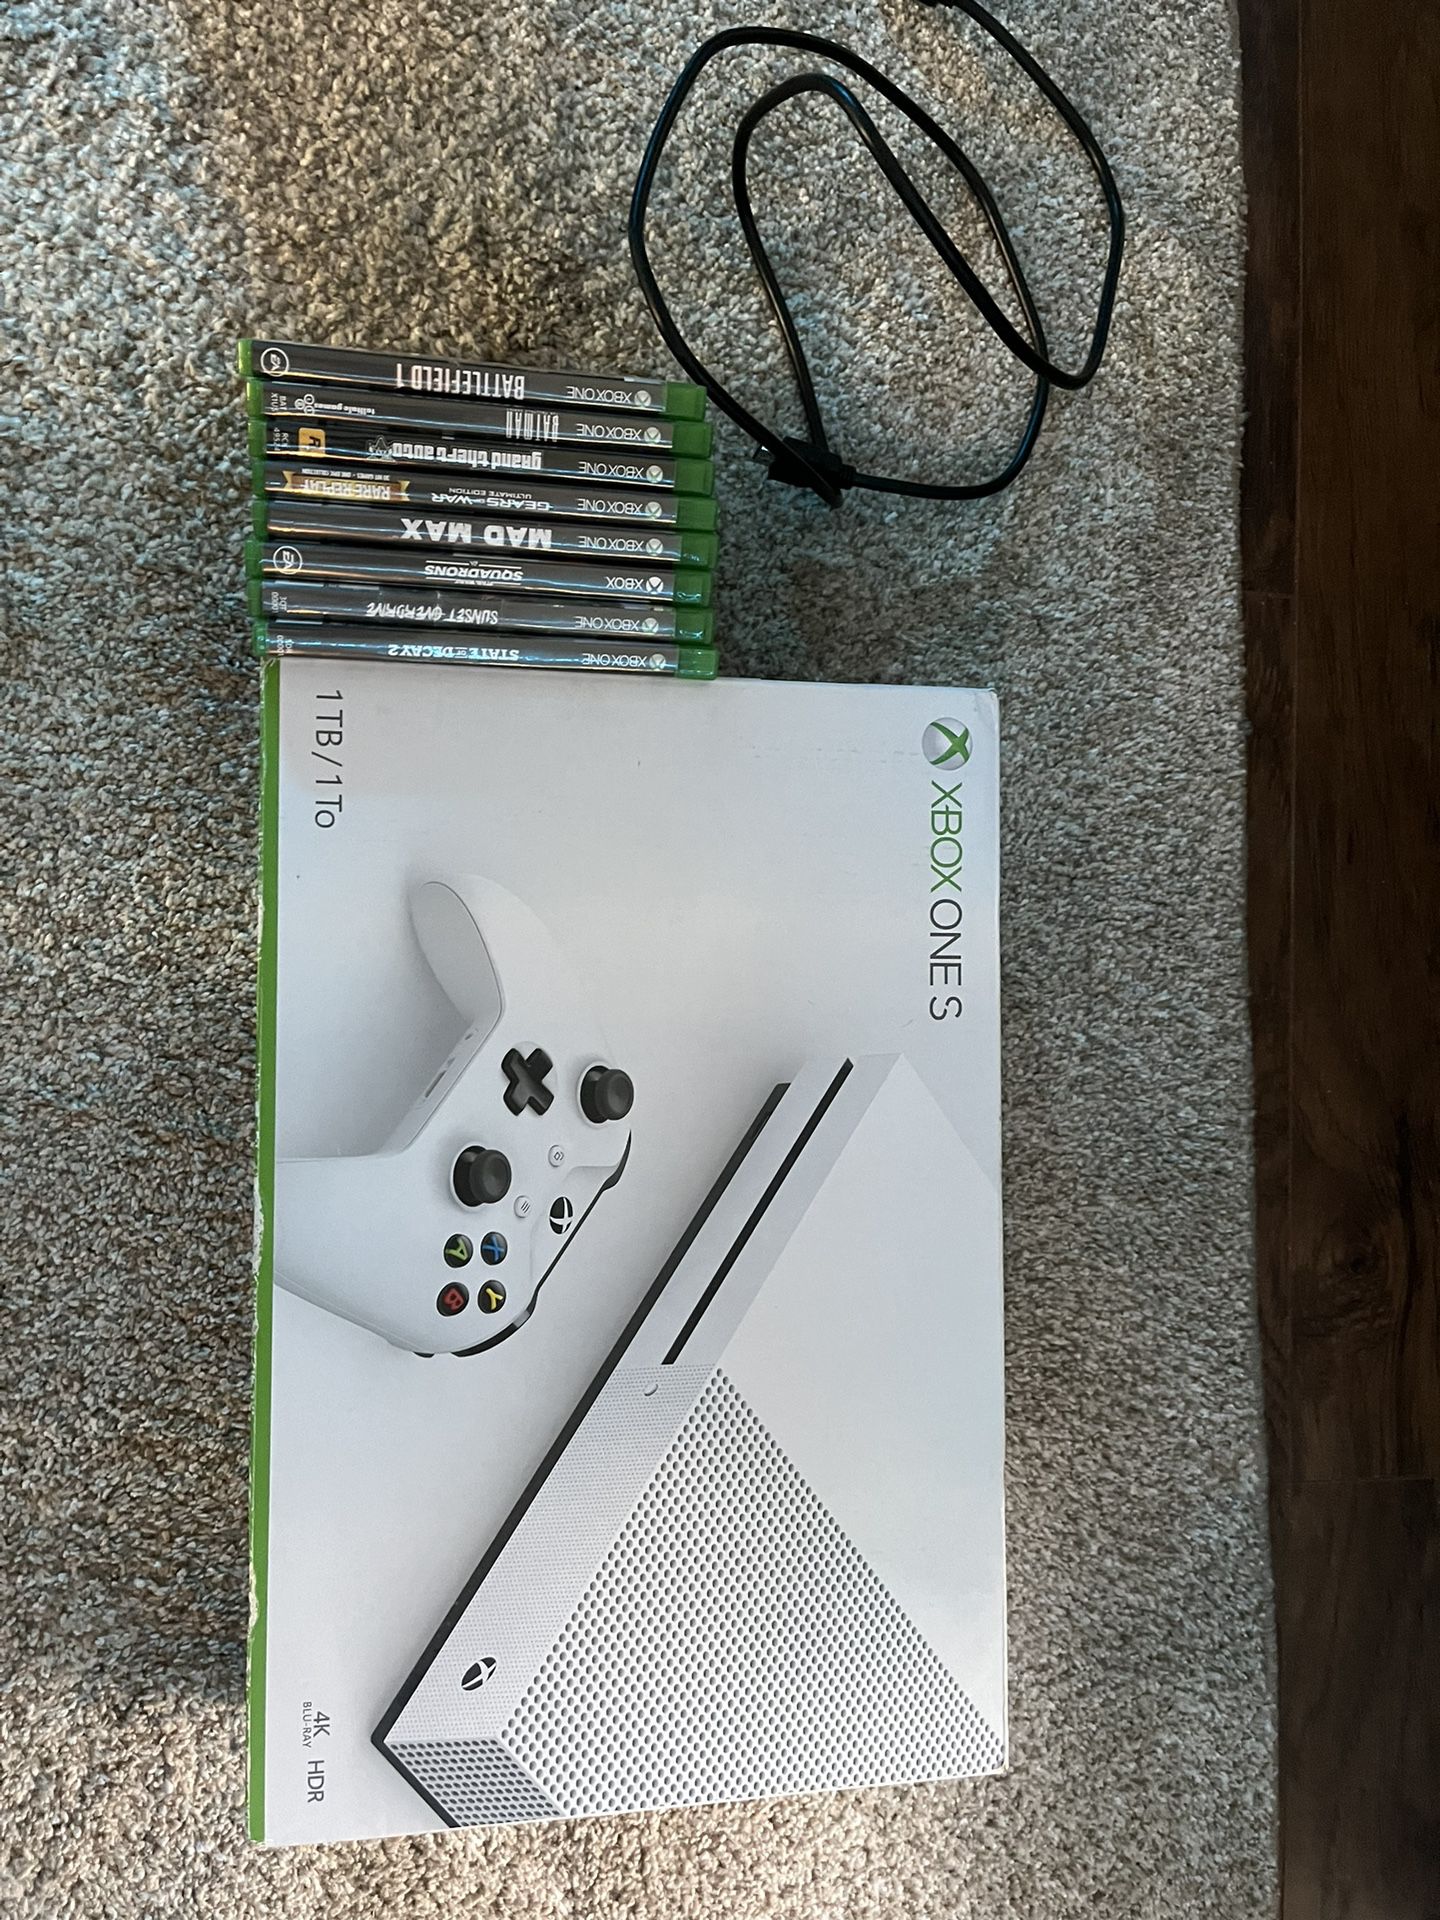 Xbox One S and 8 Games (NO CONTROLLER)